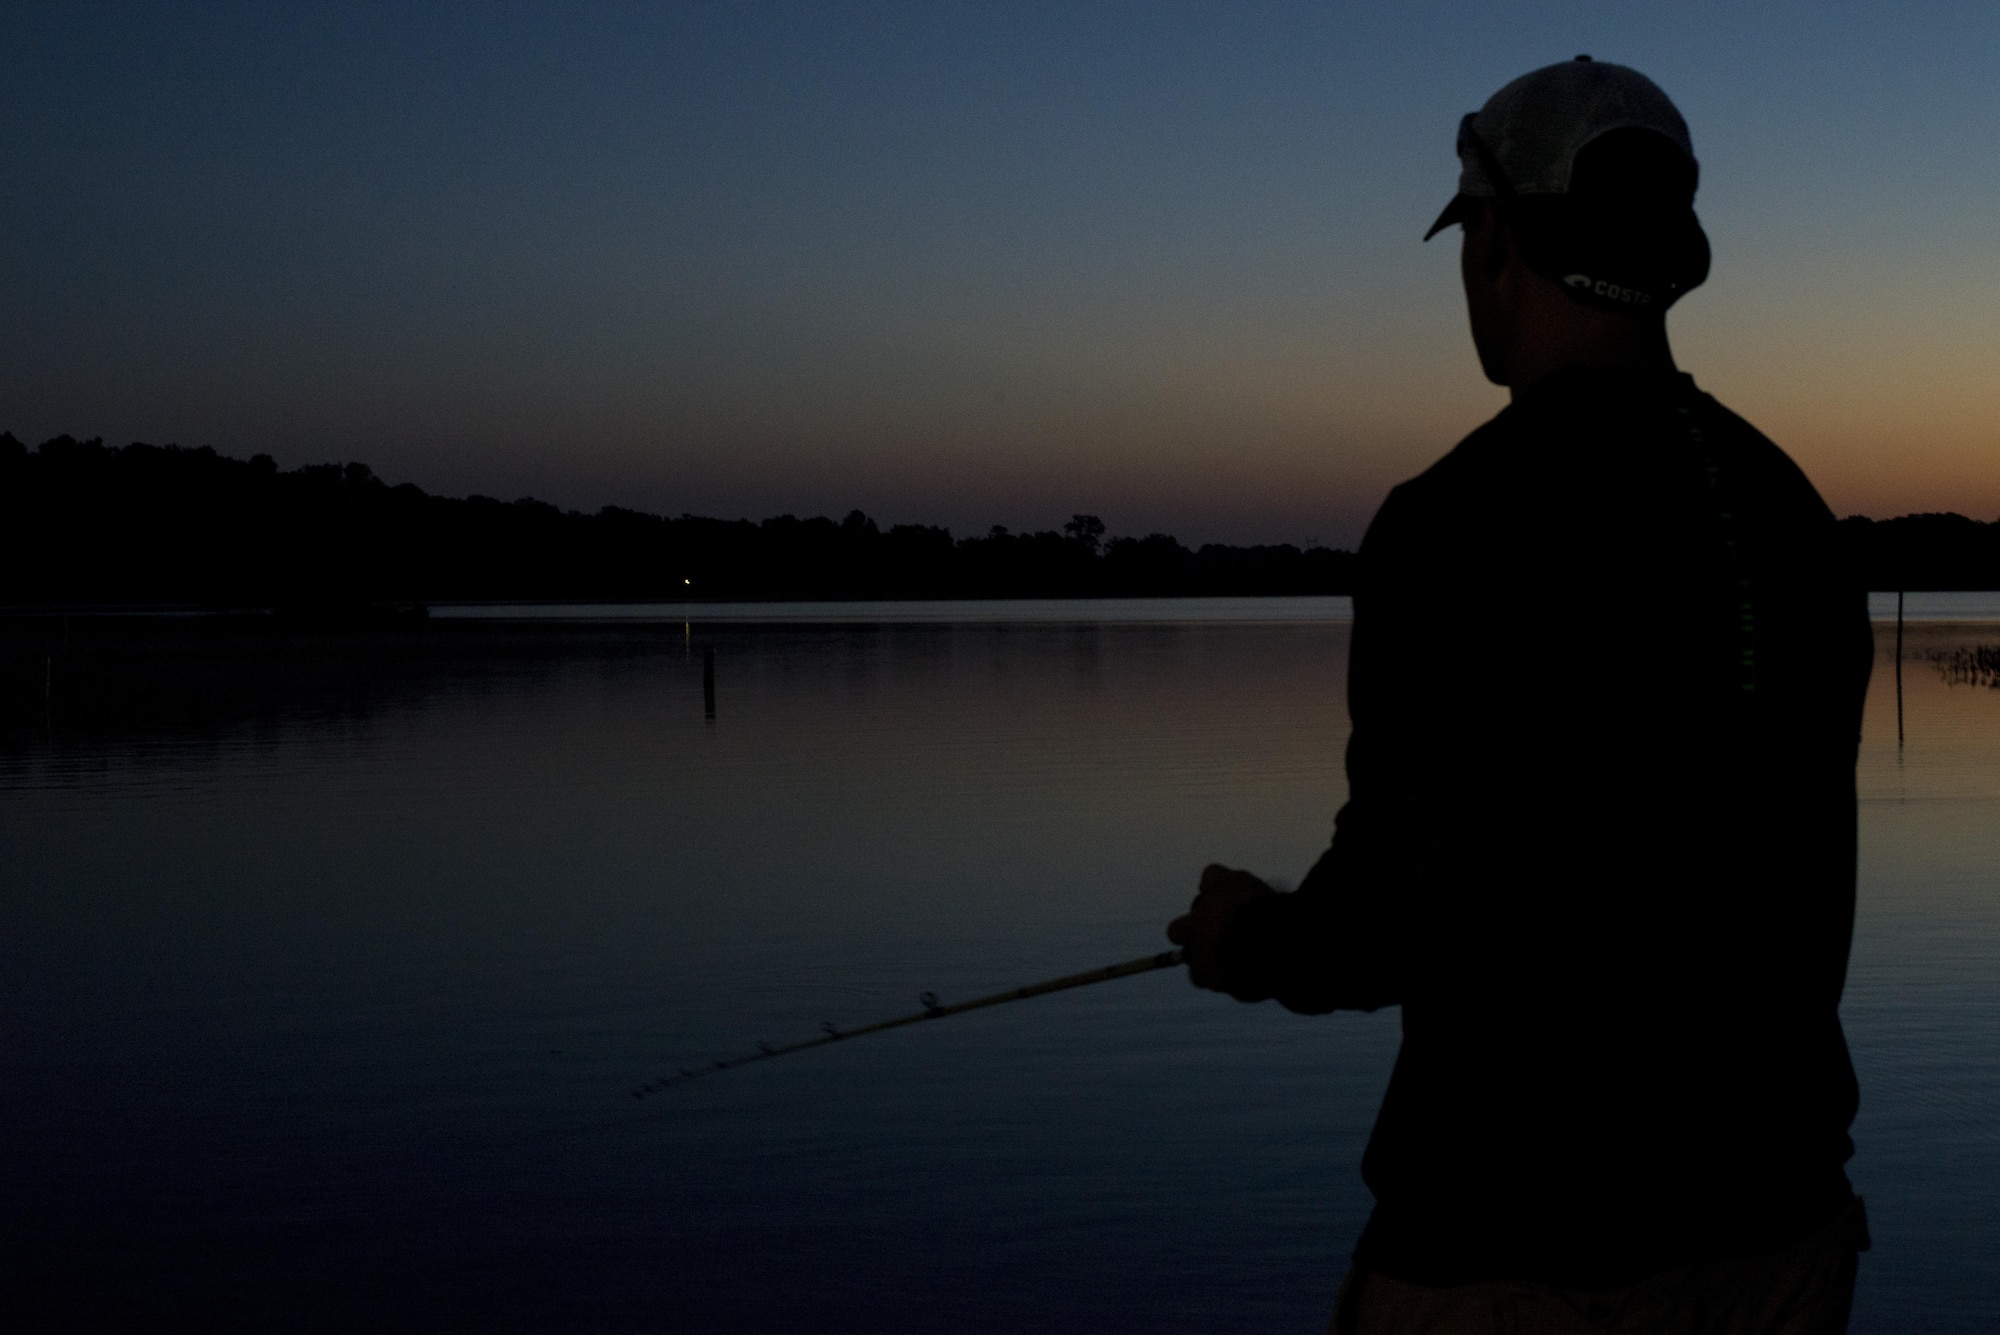 Staff Sgt. Alex Stojadinovic fishes on the Alabama River, Sept. 29, 2016. The Holm Center finance troop uses fished as an outlet to keep his mind calm. (U.S. Air Force photo by Senior Airman William Blankenship)